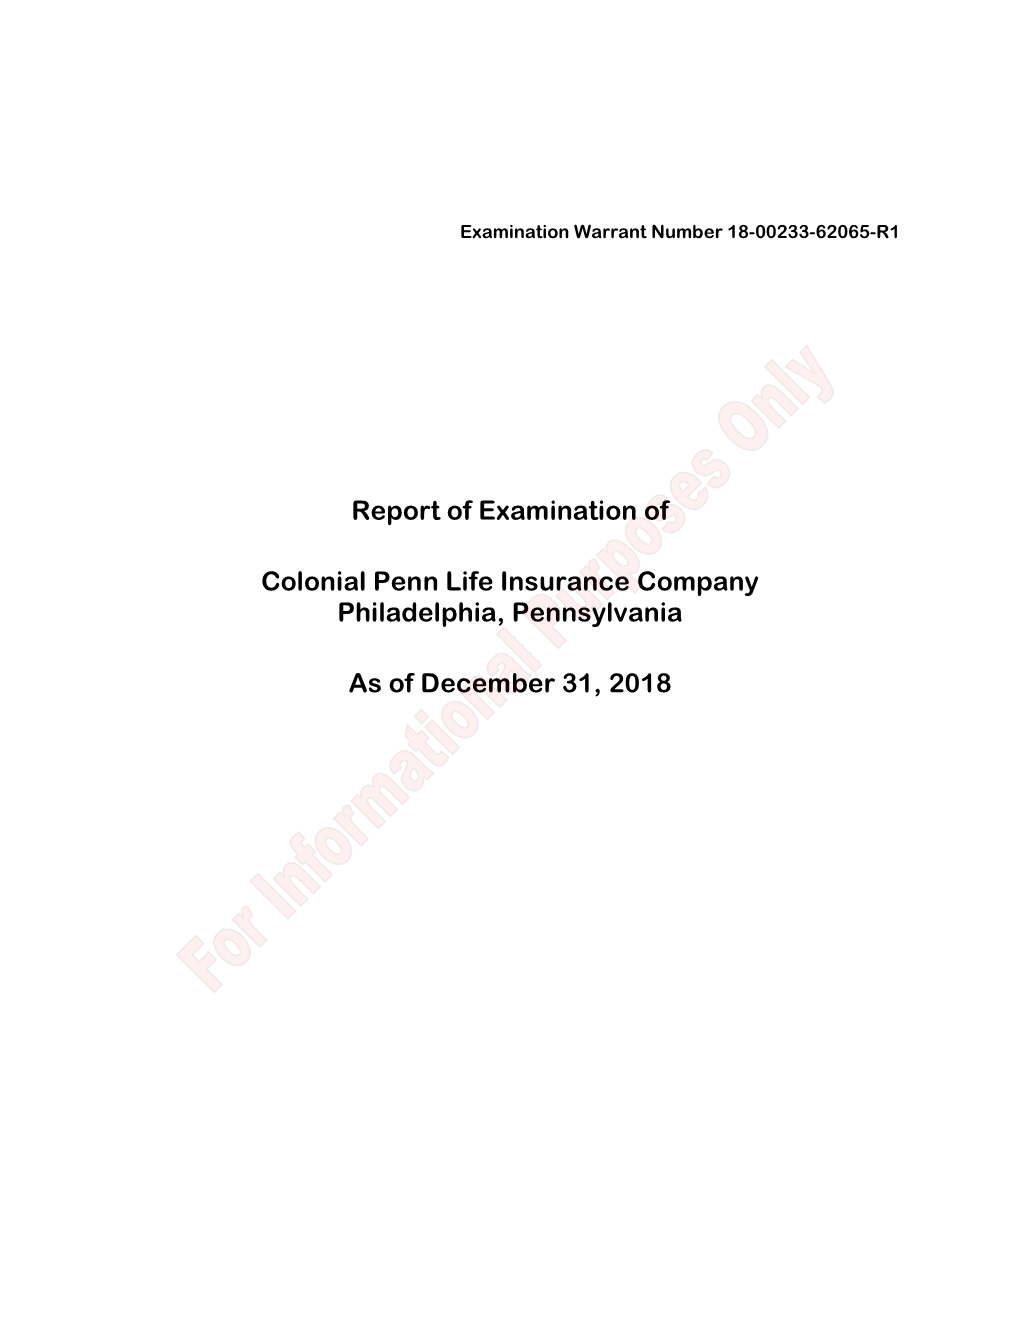 Report of Examination of Colonial Penn Life Insurance Company